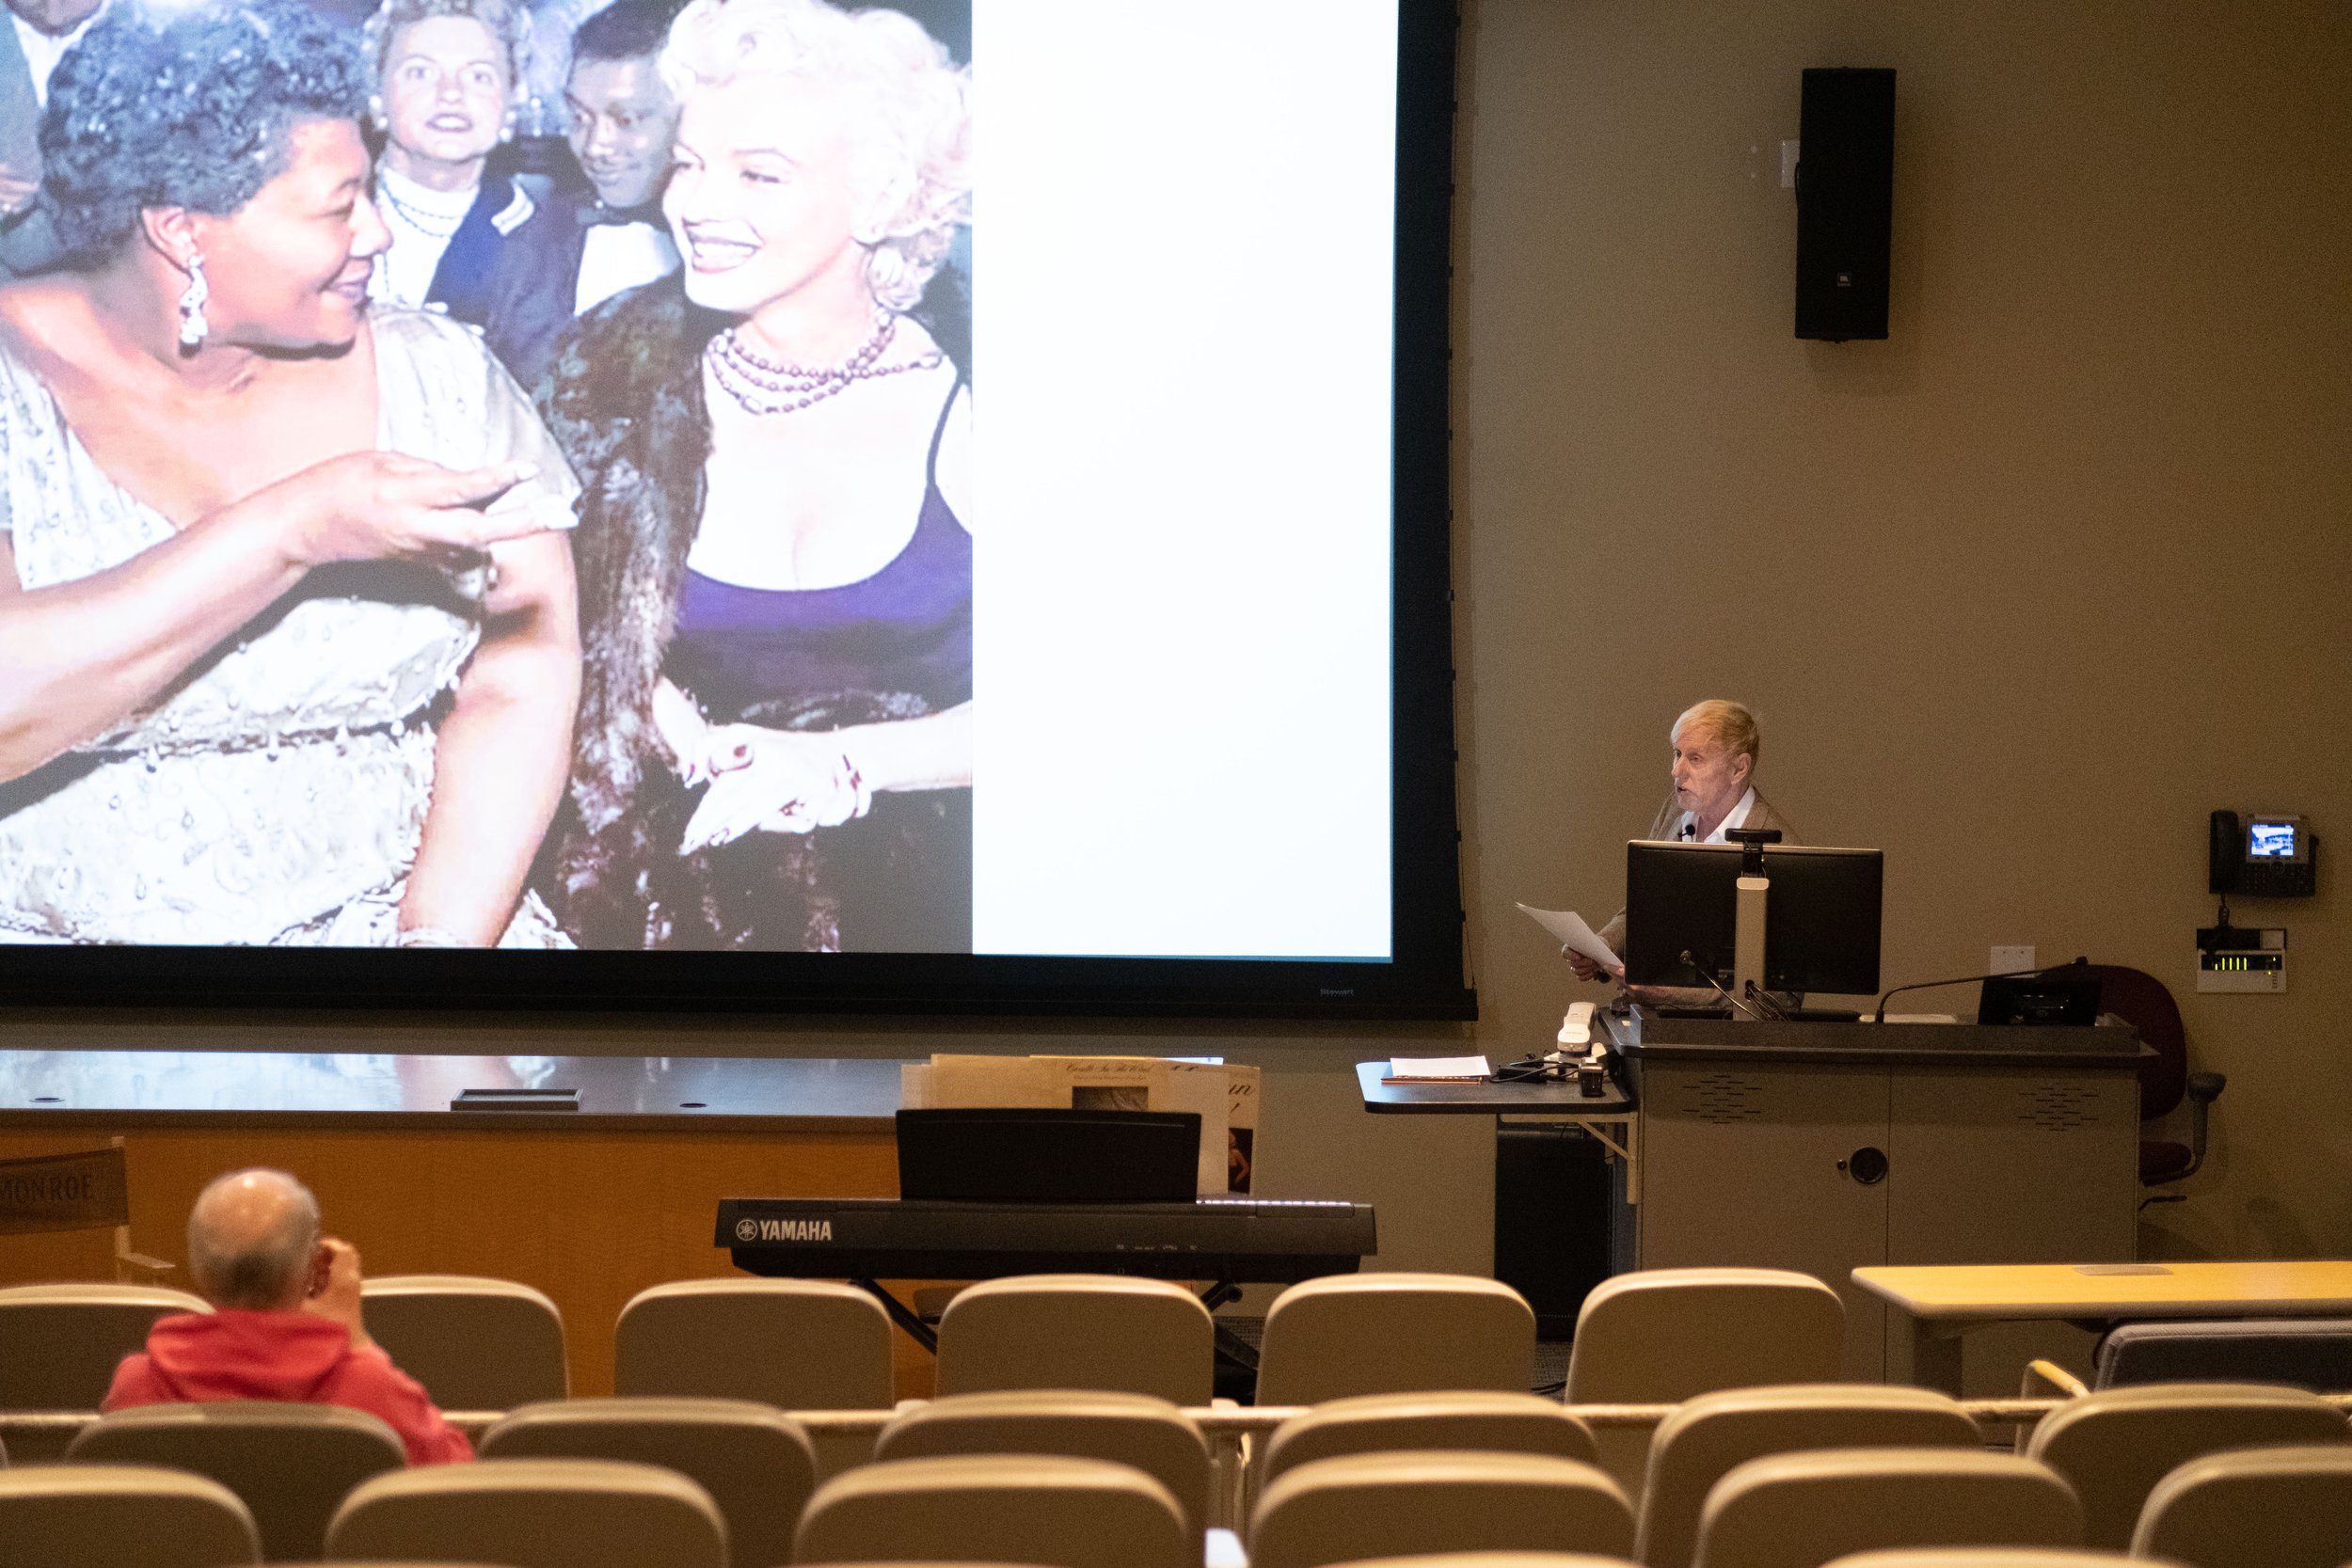  Greg Schreiner, President of the "Marilyn Remembered" fan club since 1982, opens the spring Social Justice Lecture Series with "The Mystique of Marilyn Monroe" on Thursday, March 9, 2023 in Stromberg Hall on the main campus at Santa Monica College i